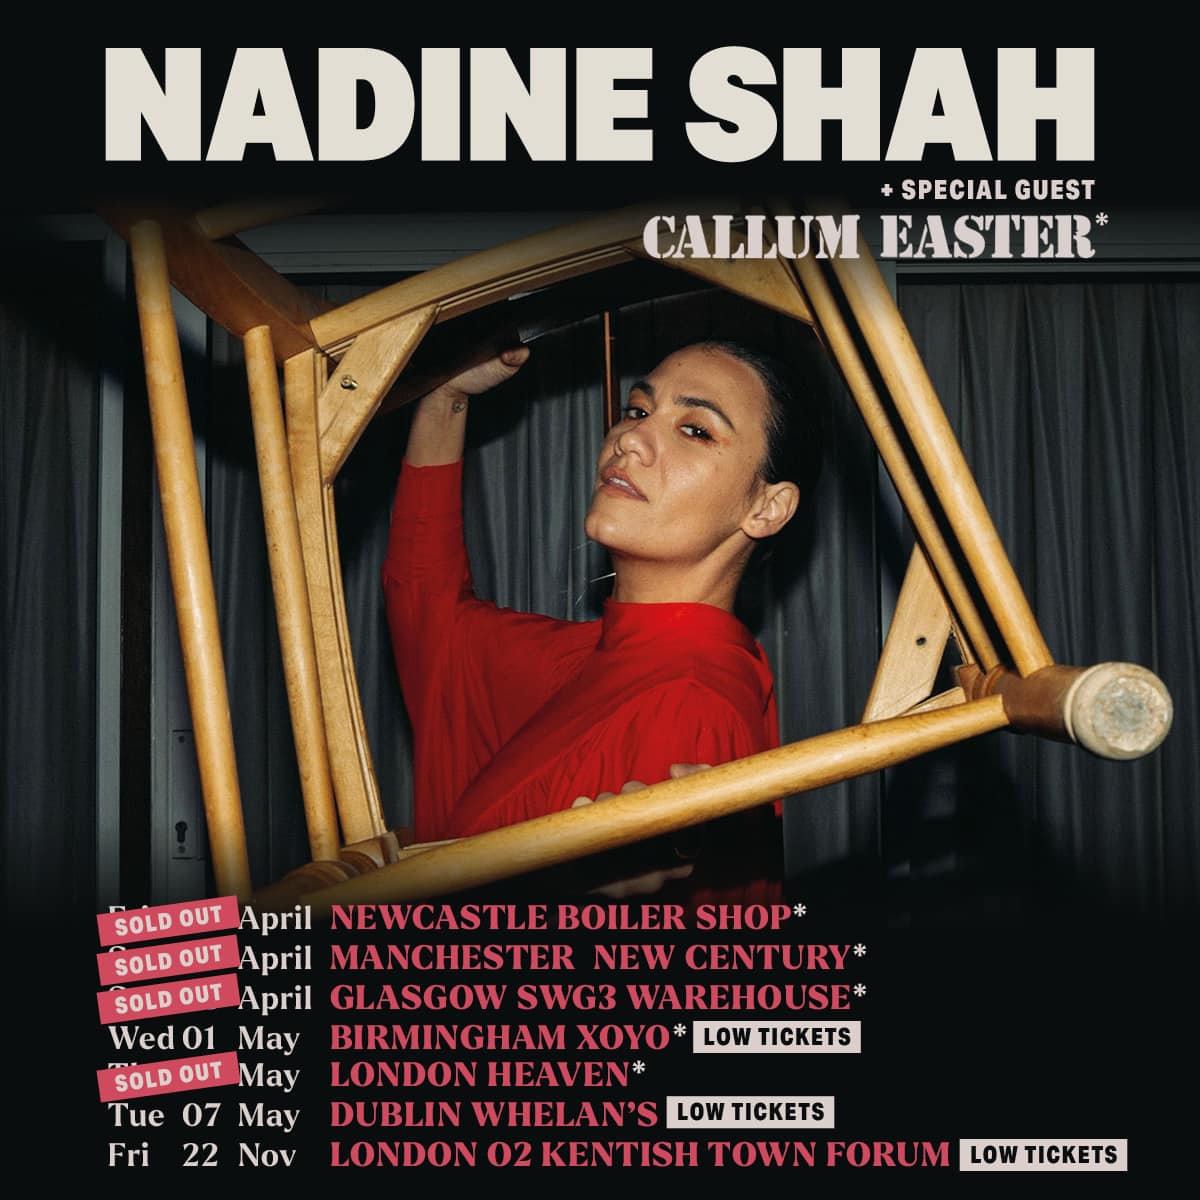 TIME CHANGE Doors for tonight's @nadineshah show now open at 7:30pm.